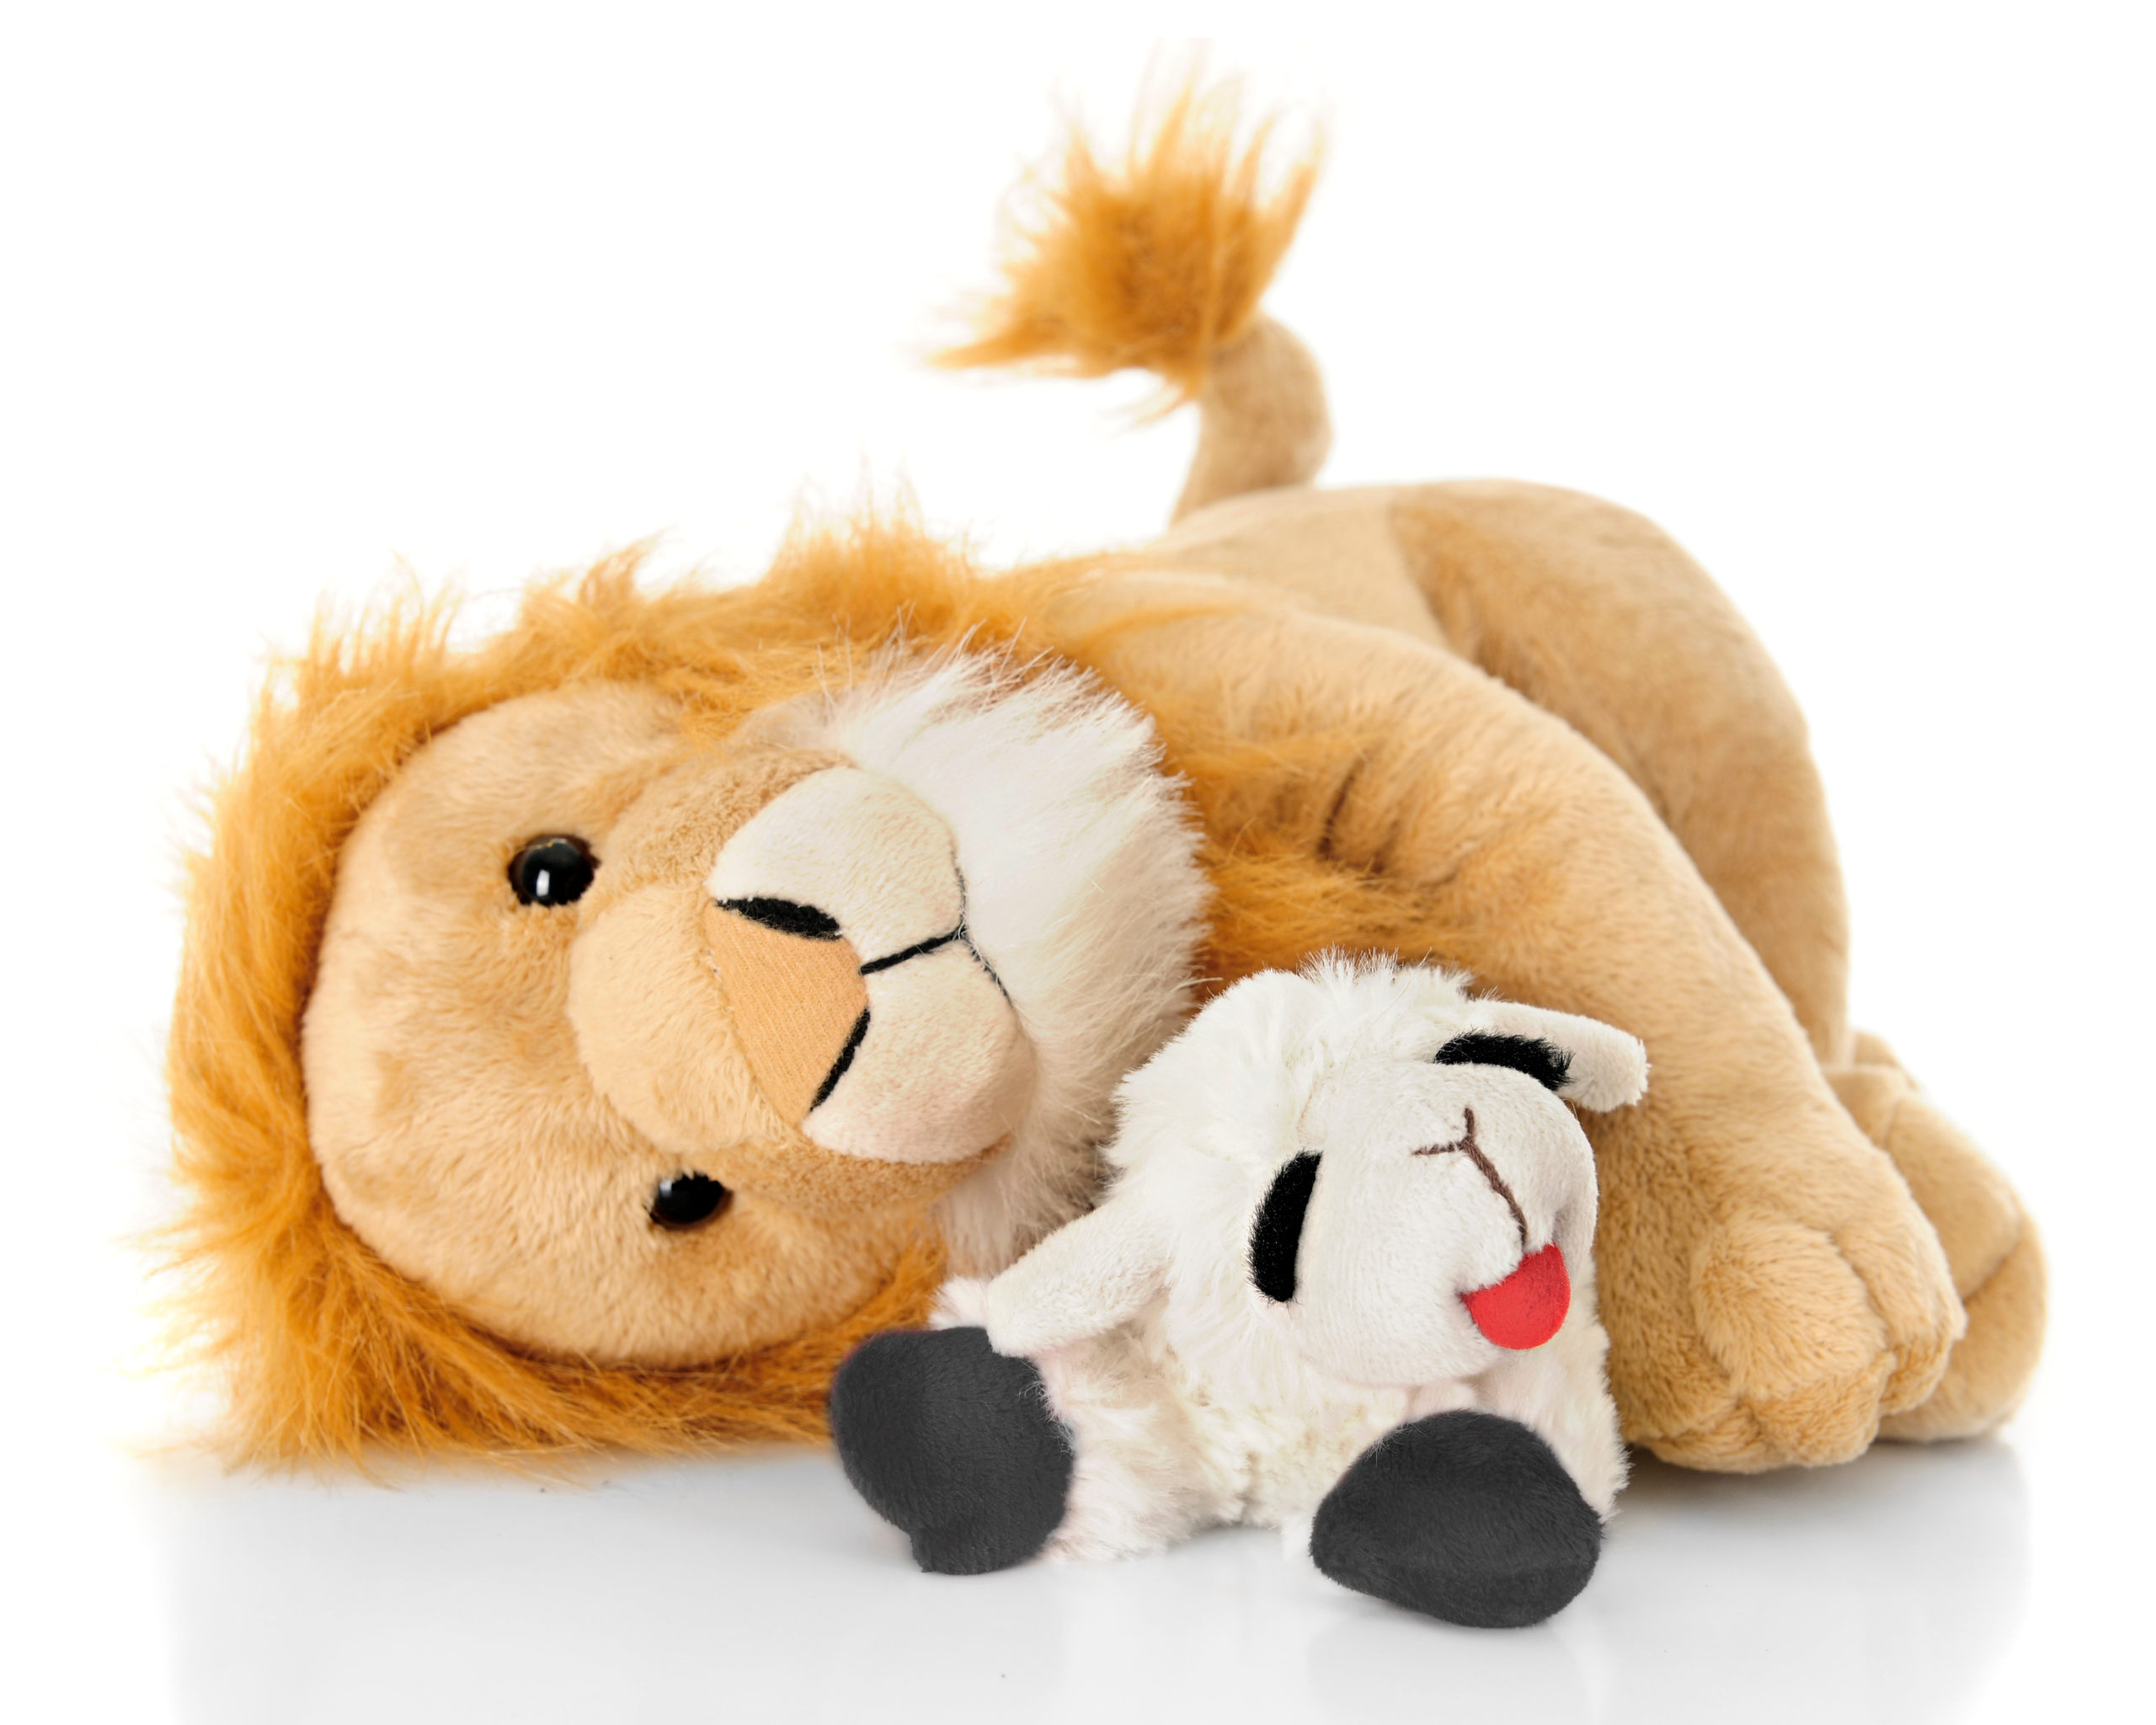 A toy lamb and lion peacefully laying down together. On a white background.